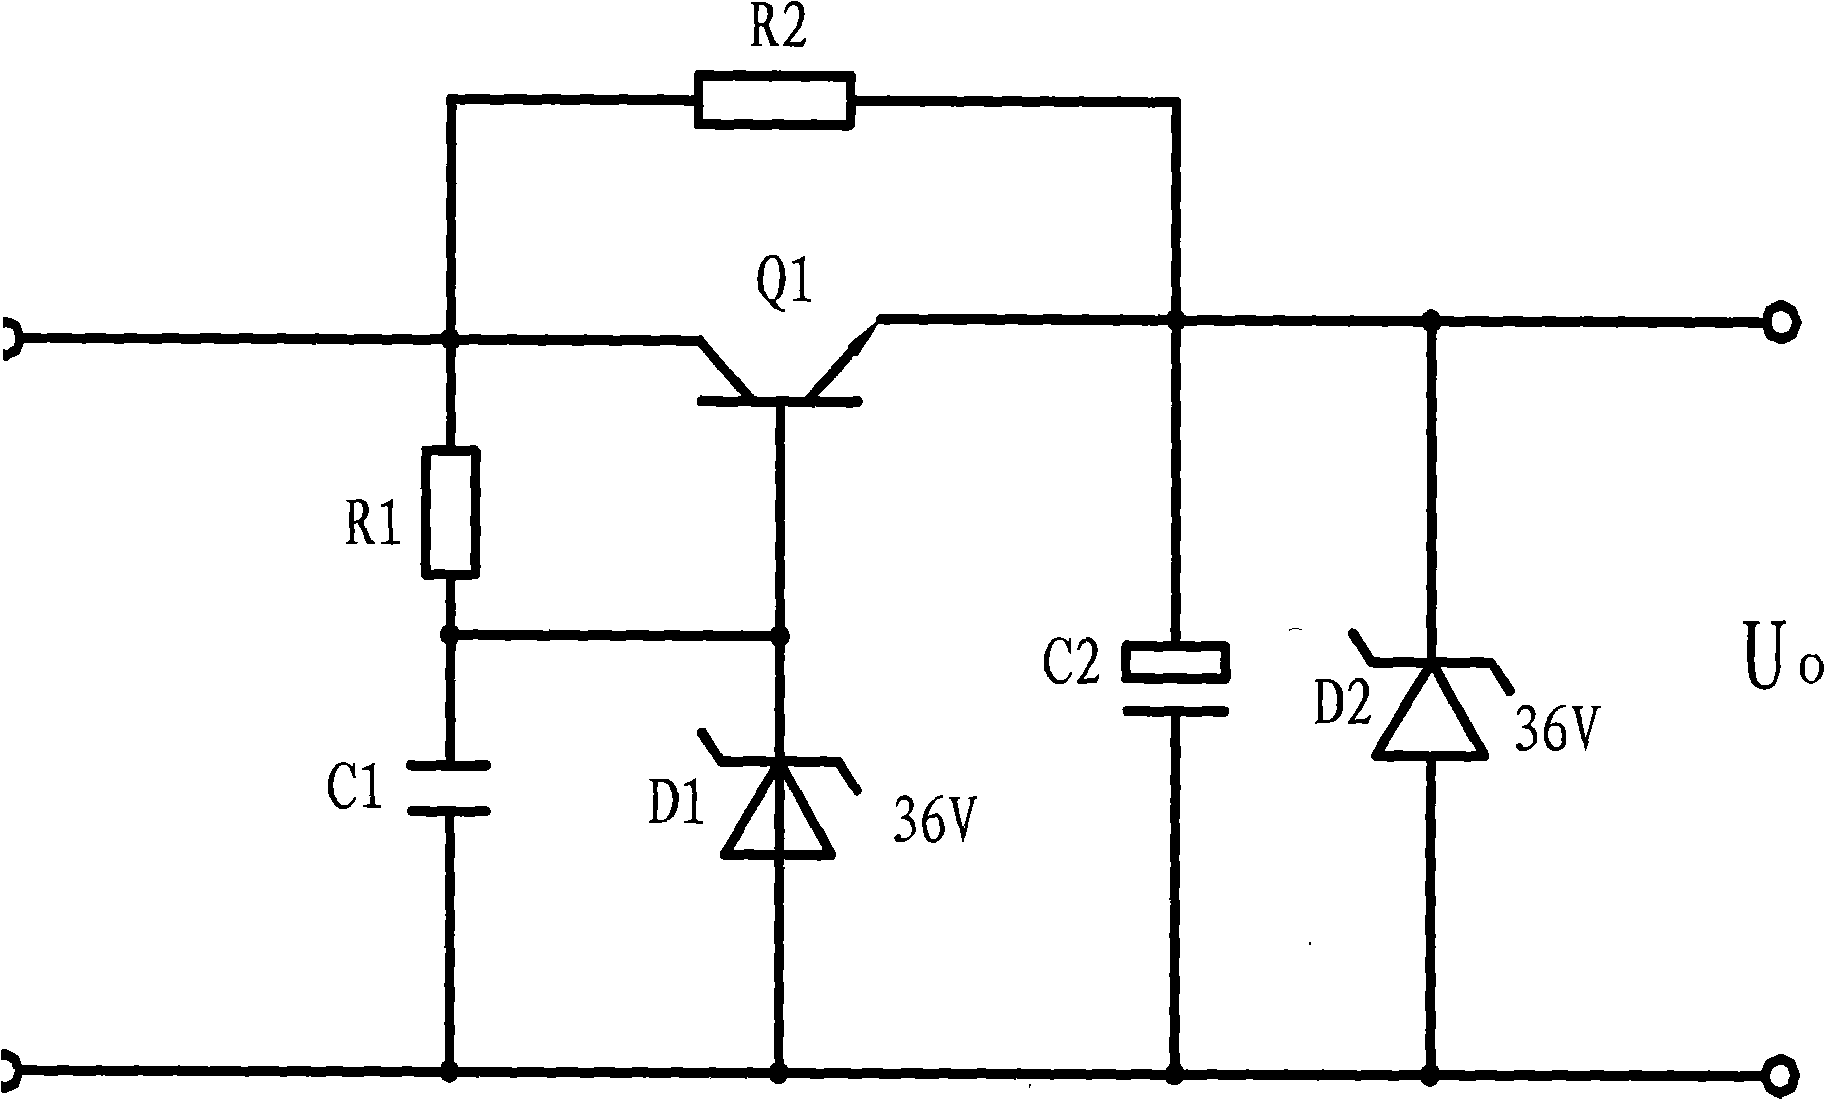 DC over-voltage protection circuit